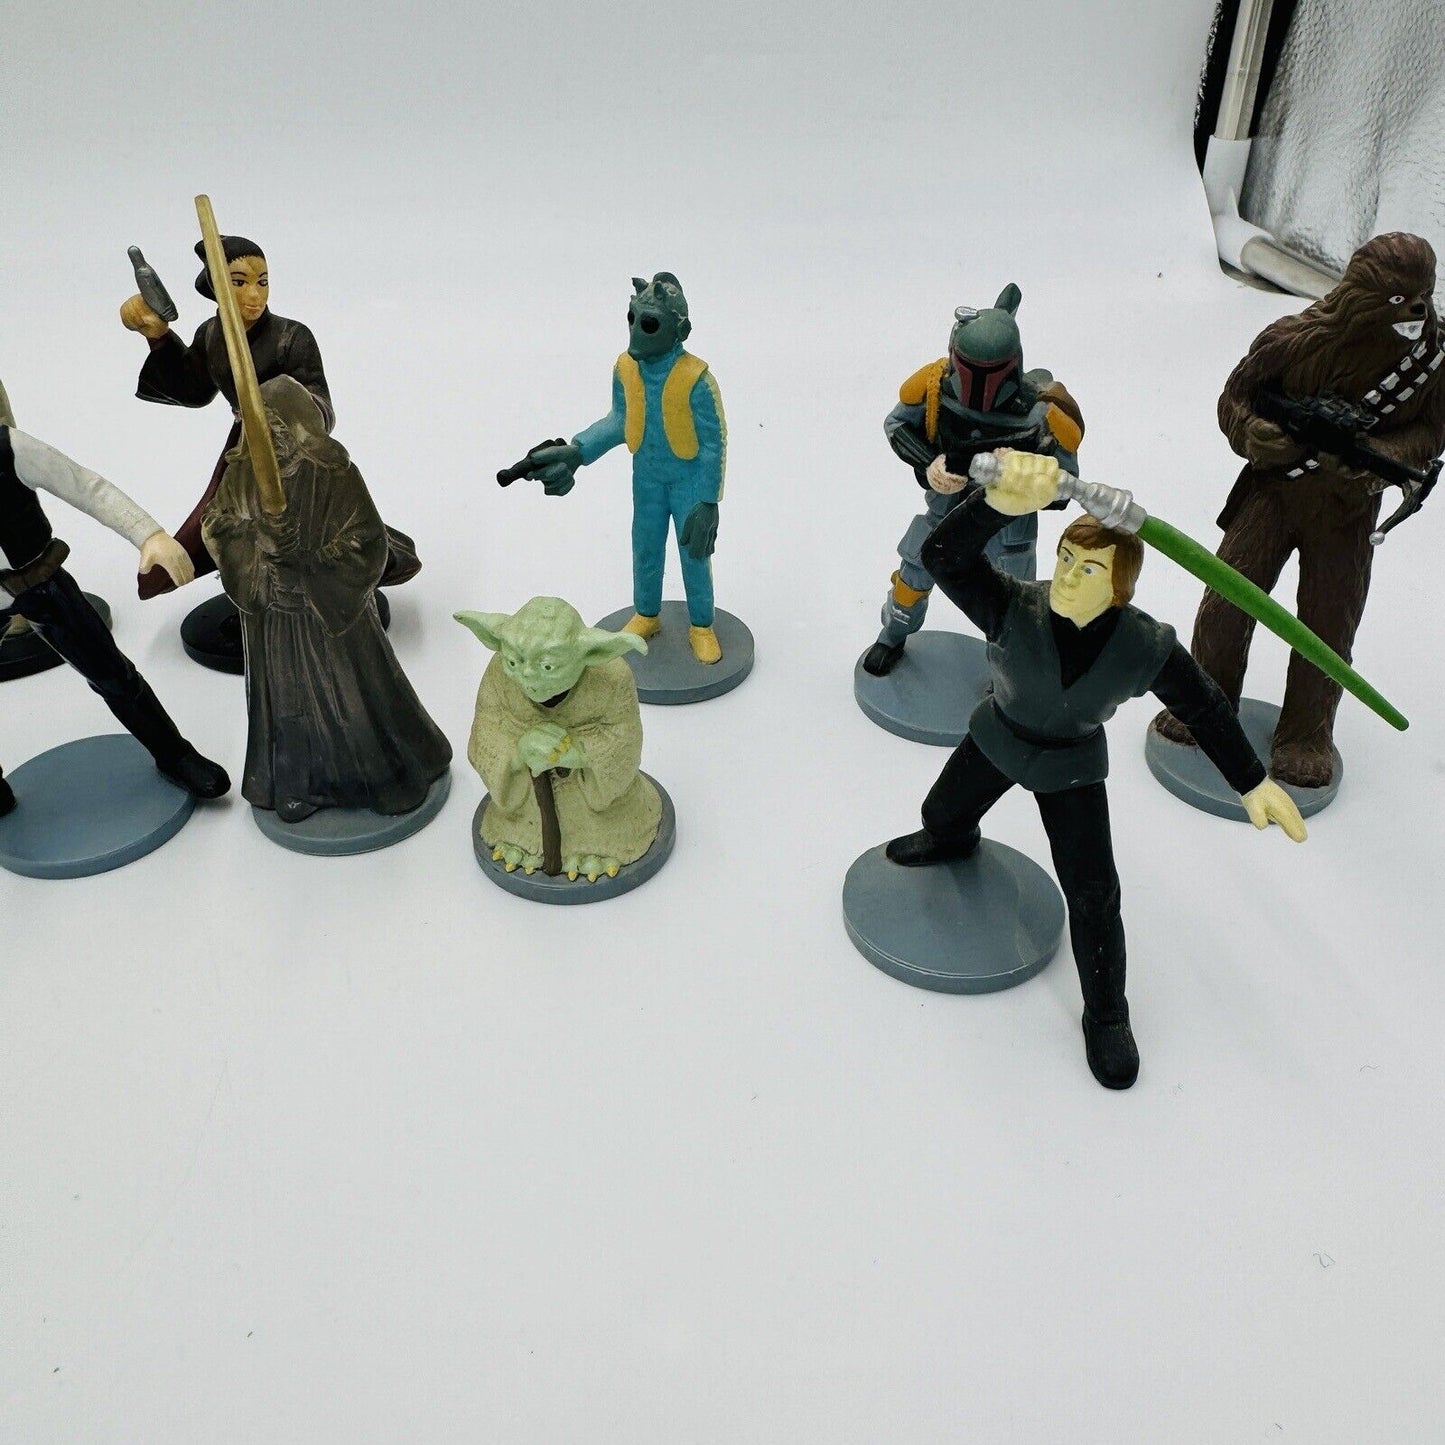 Vintage Applause Star Wars Figurines with Stand 1999 Lot 22 Pieces